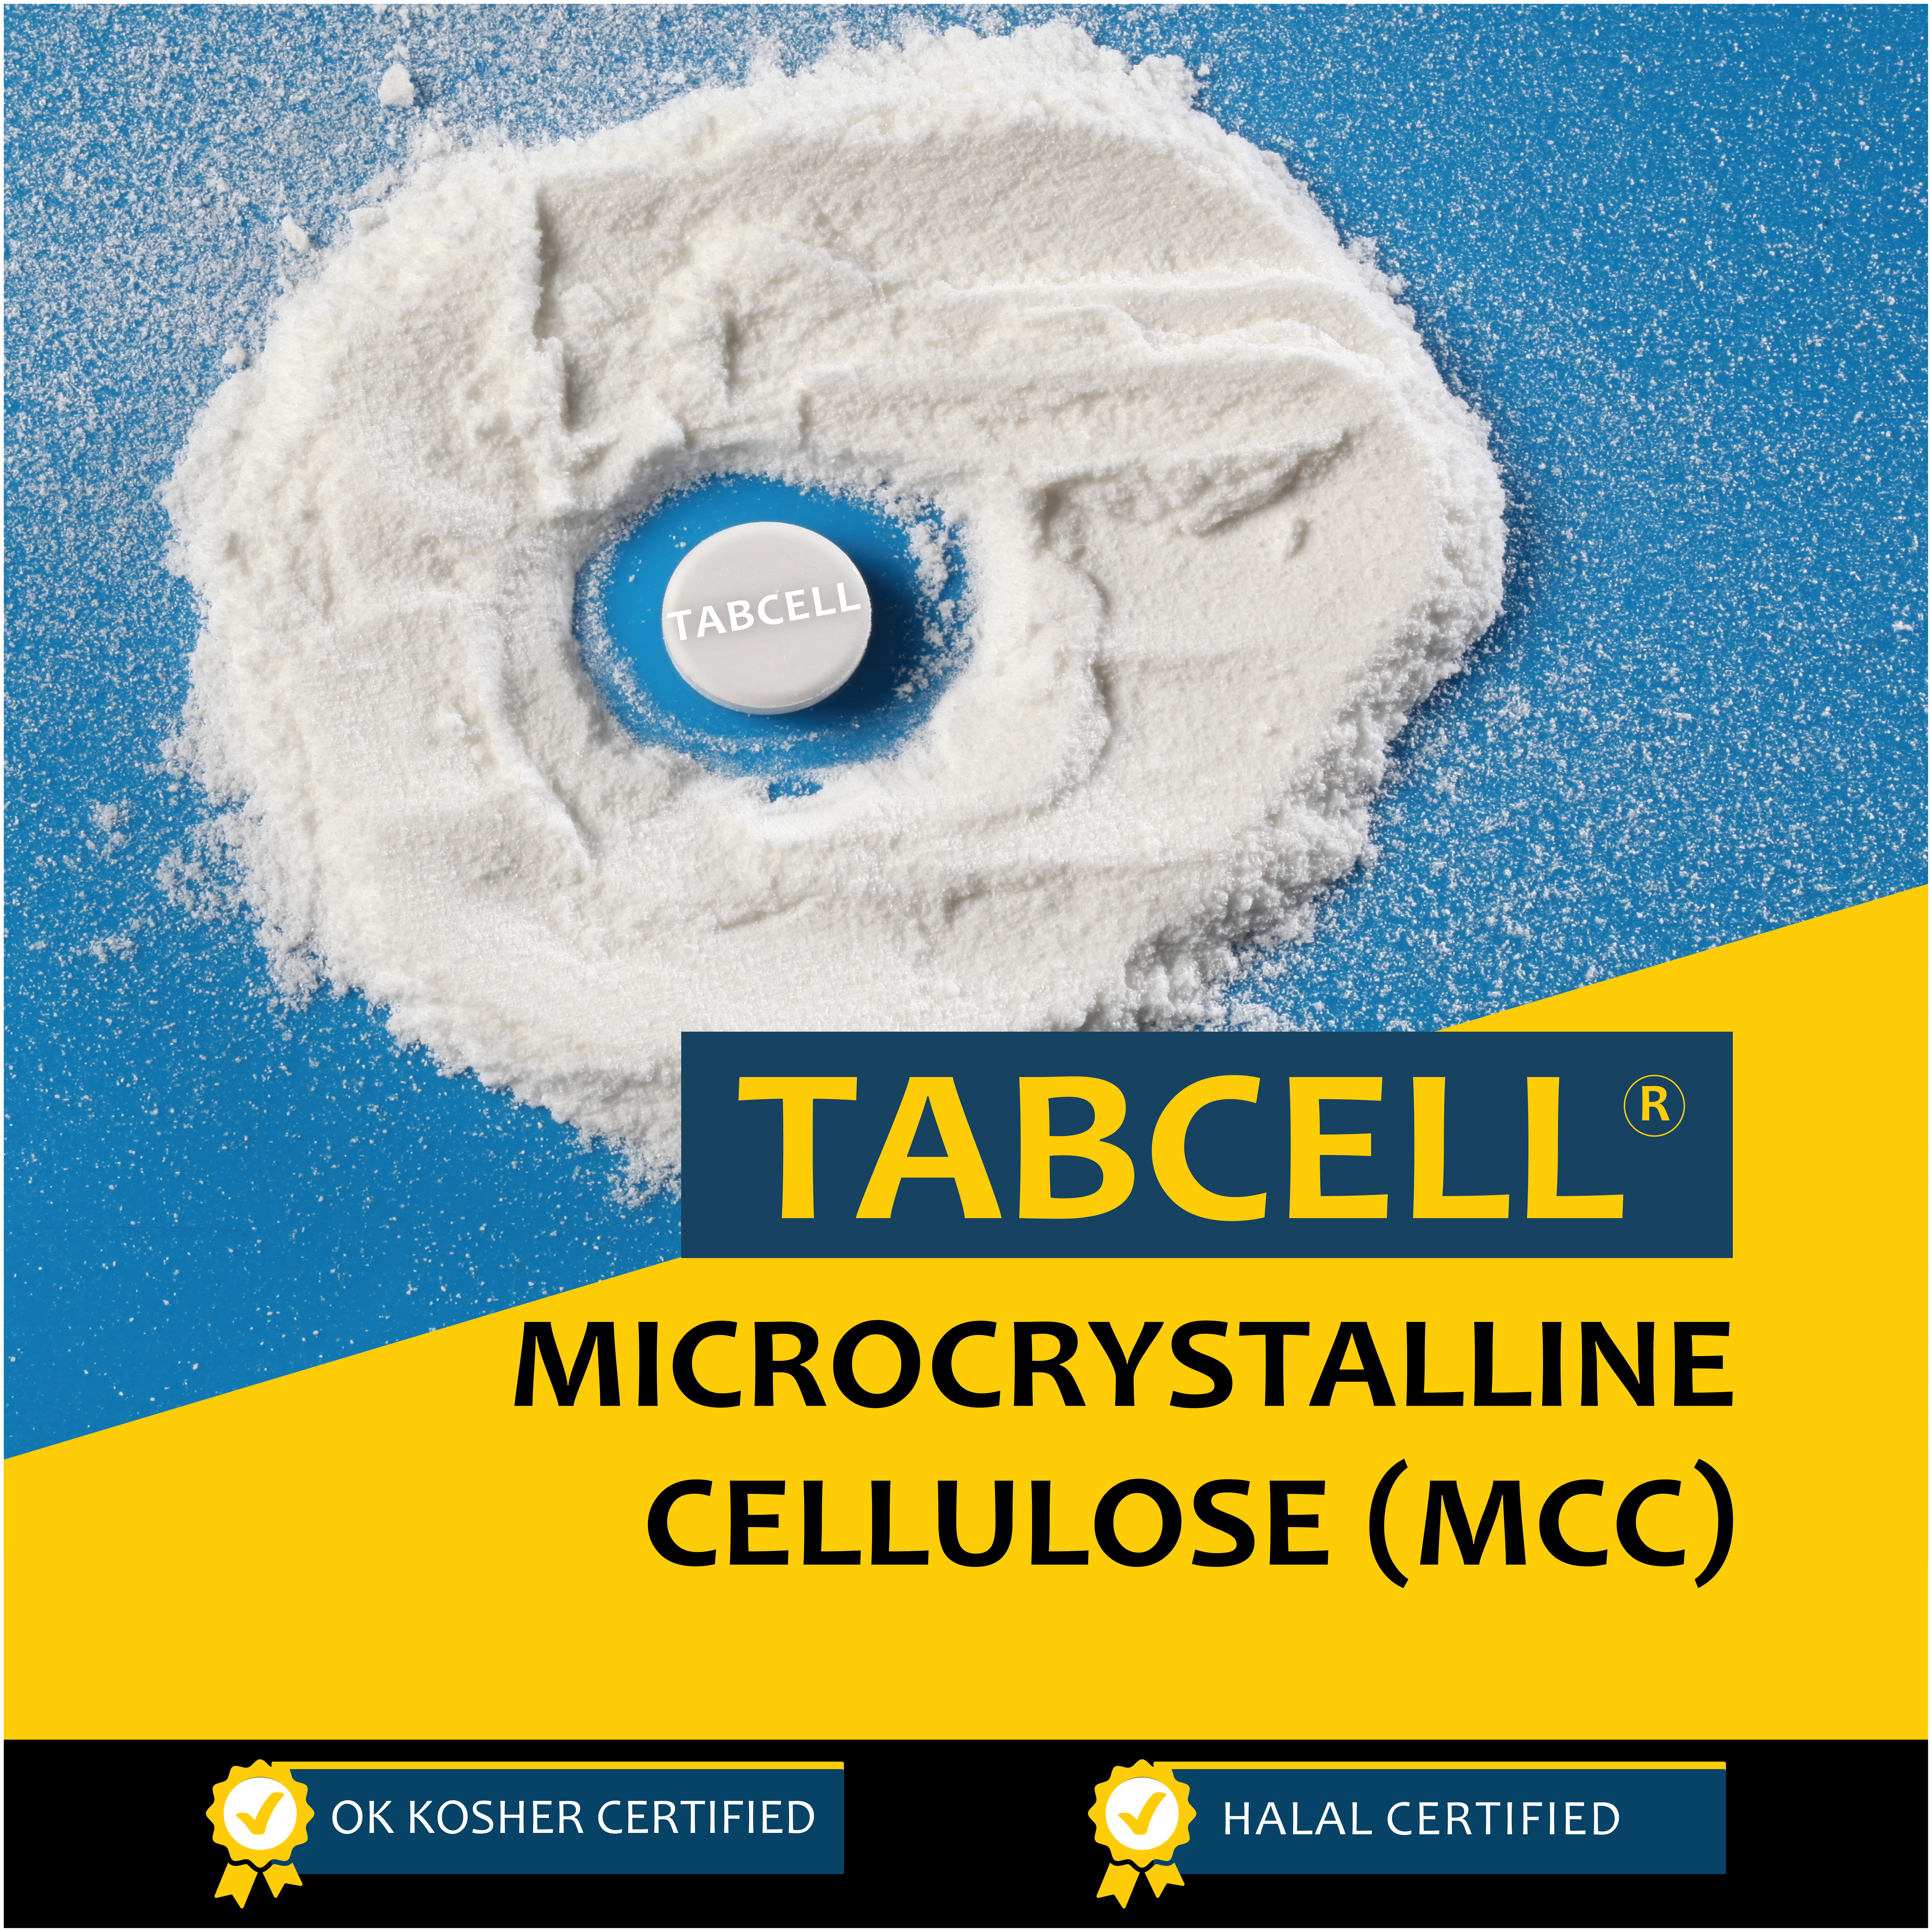 TABCELL - MICROCRYSTALLINE CELLULOSE